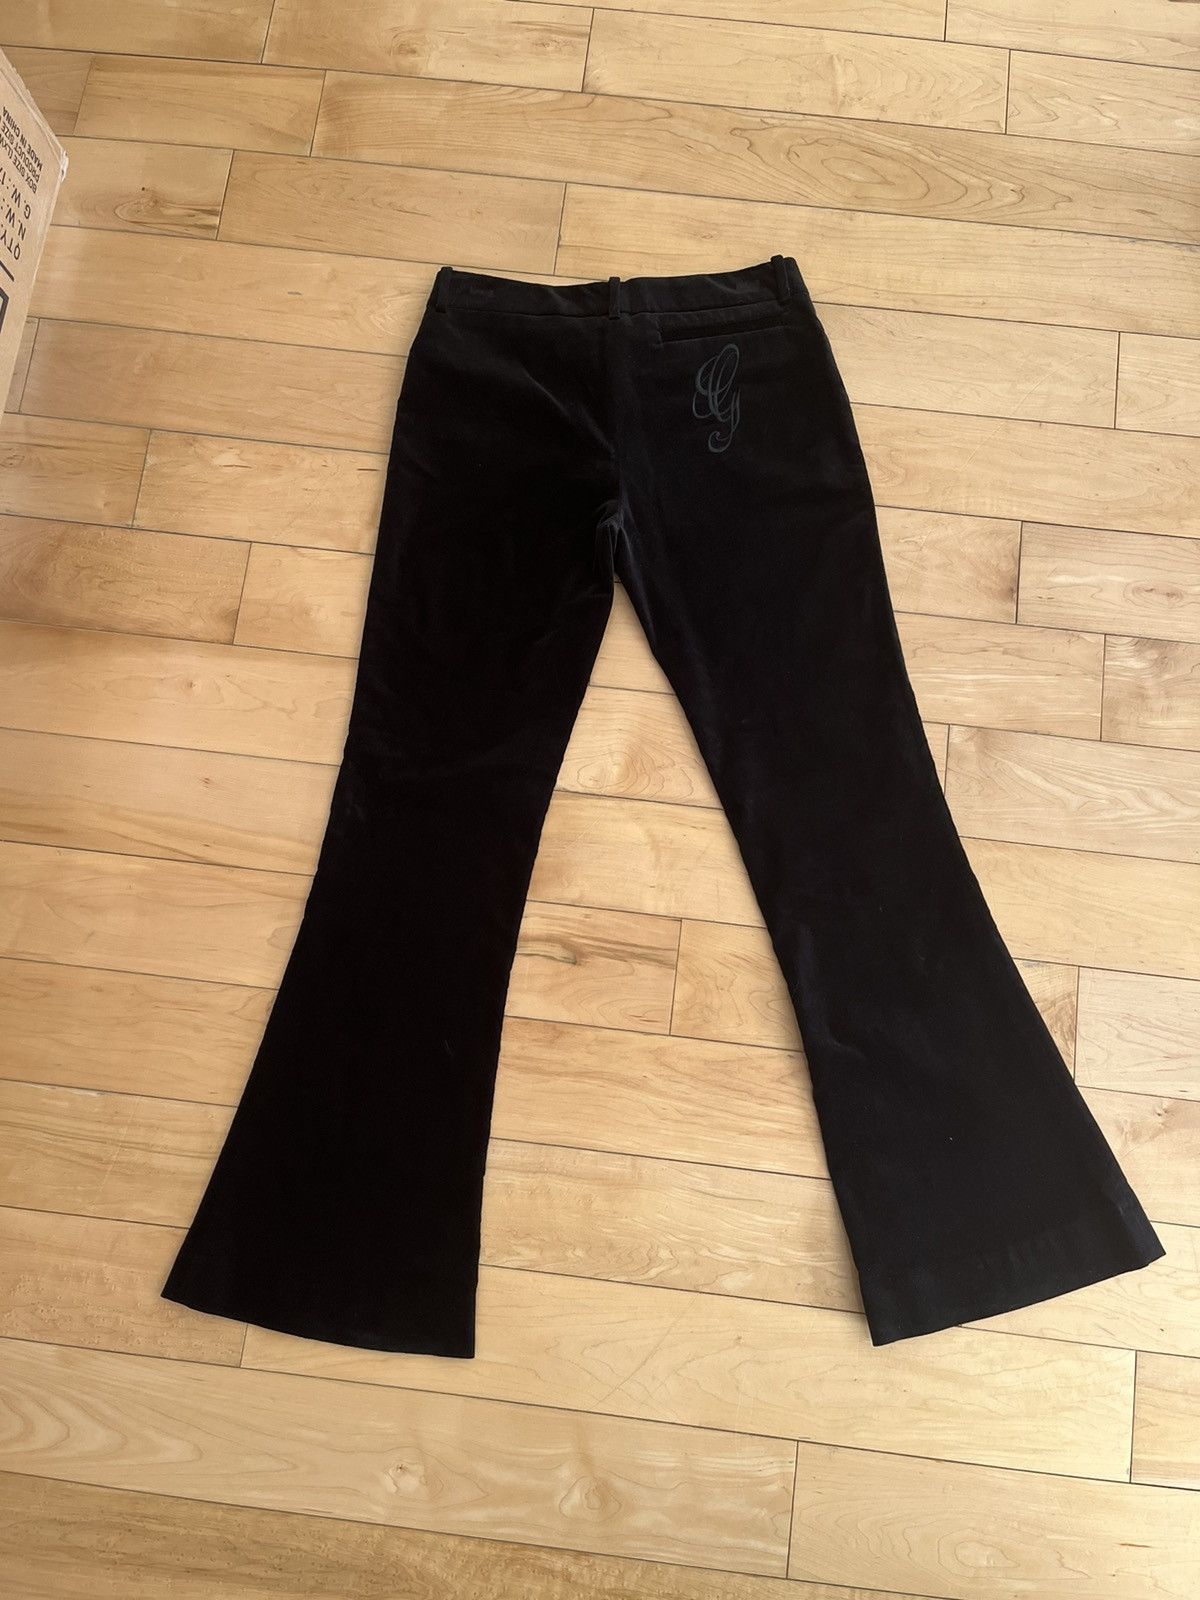 FW95 Gucci by Tom Ford Velvet Flared Trousers - 3